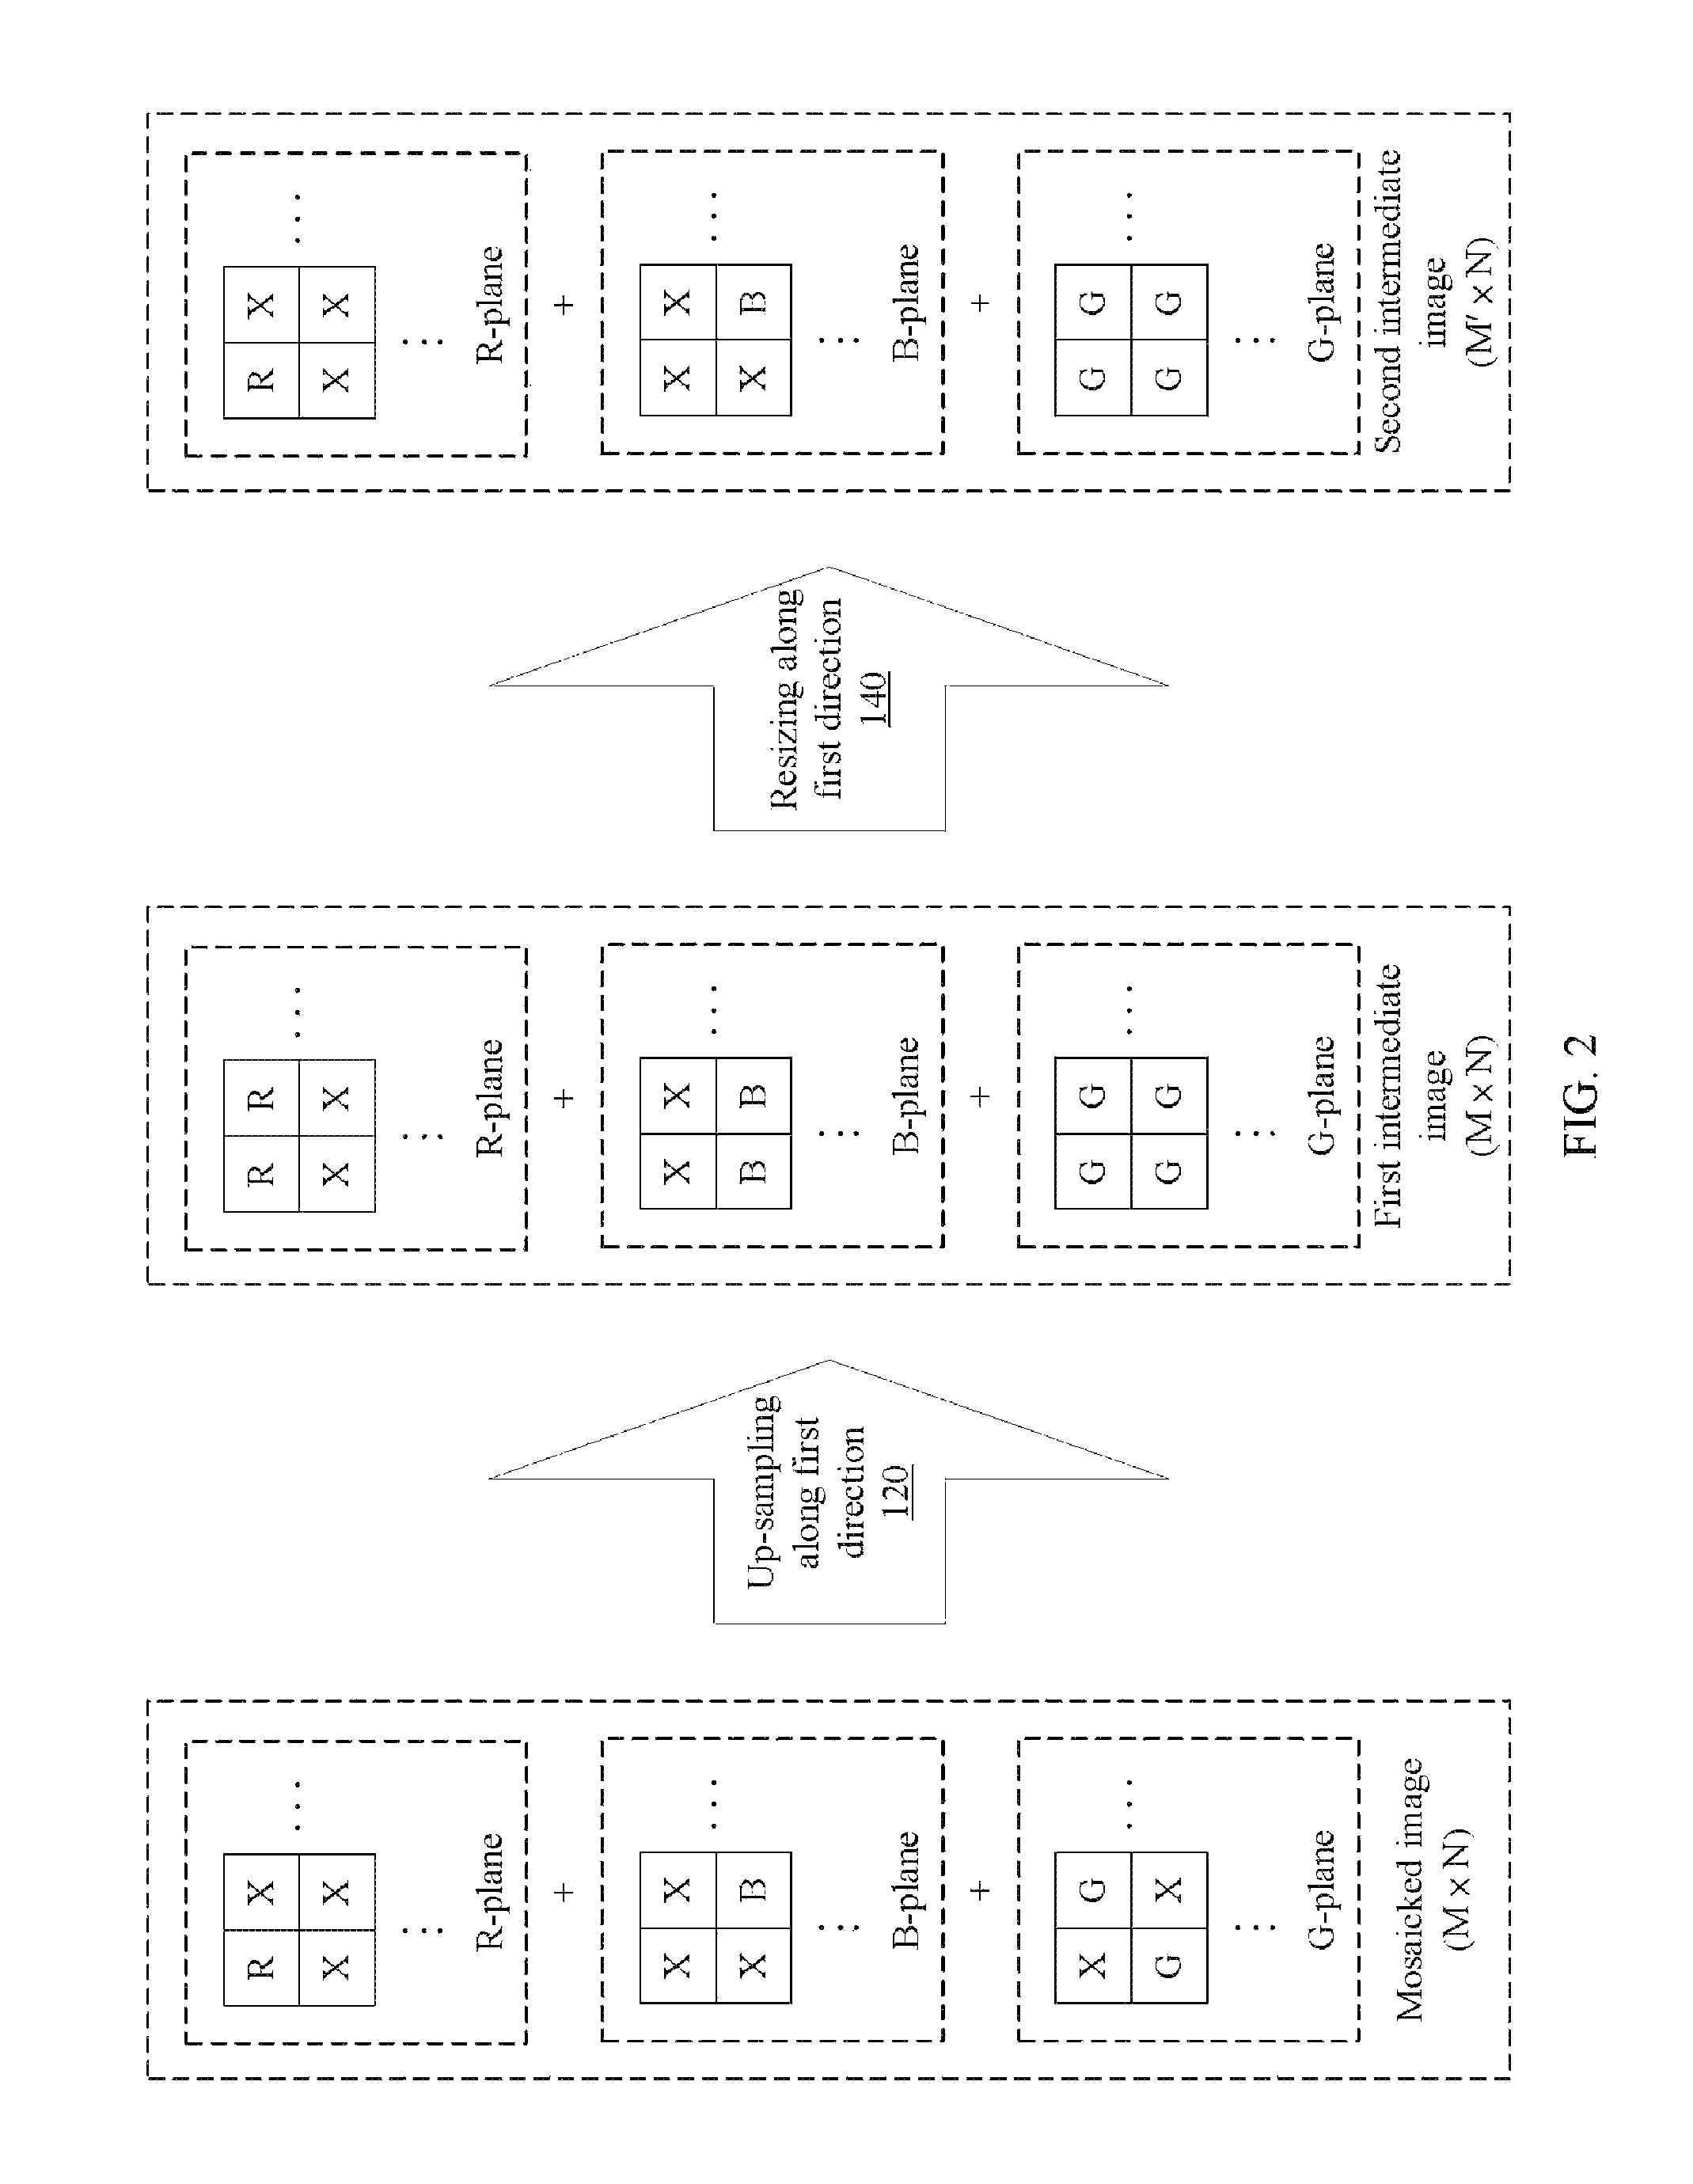 Methods of processing mosaicked images